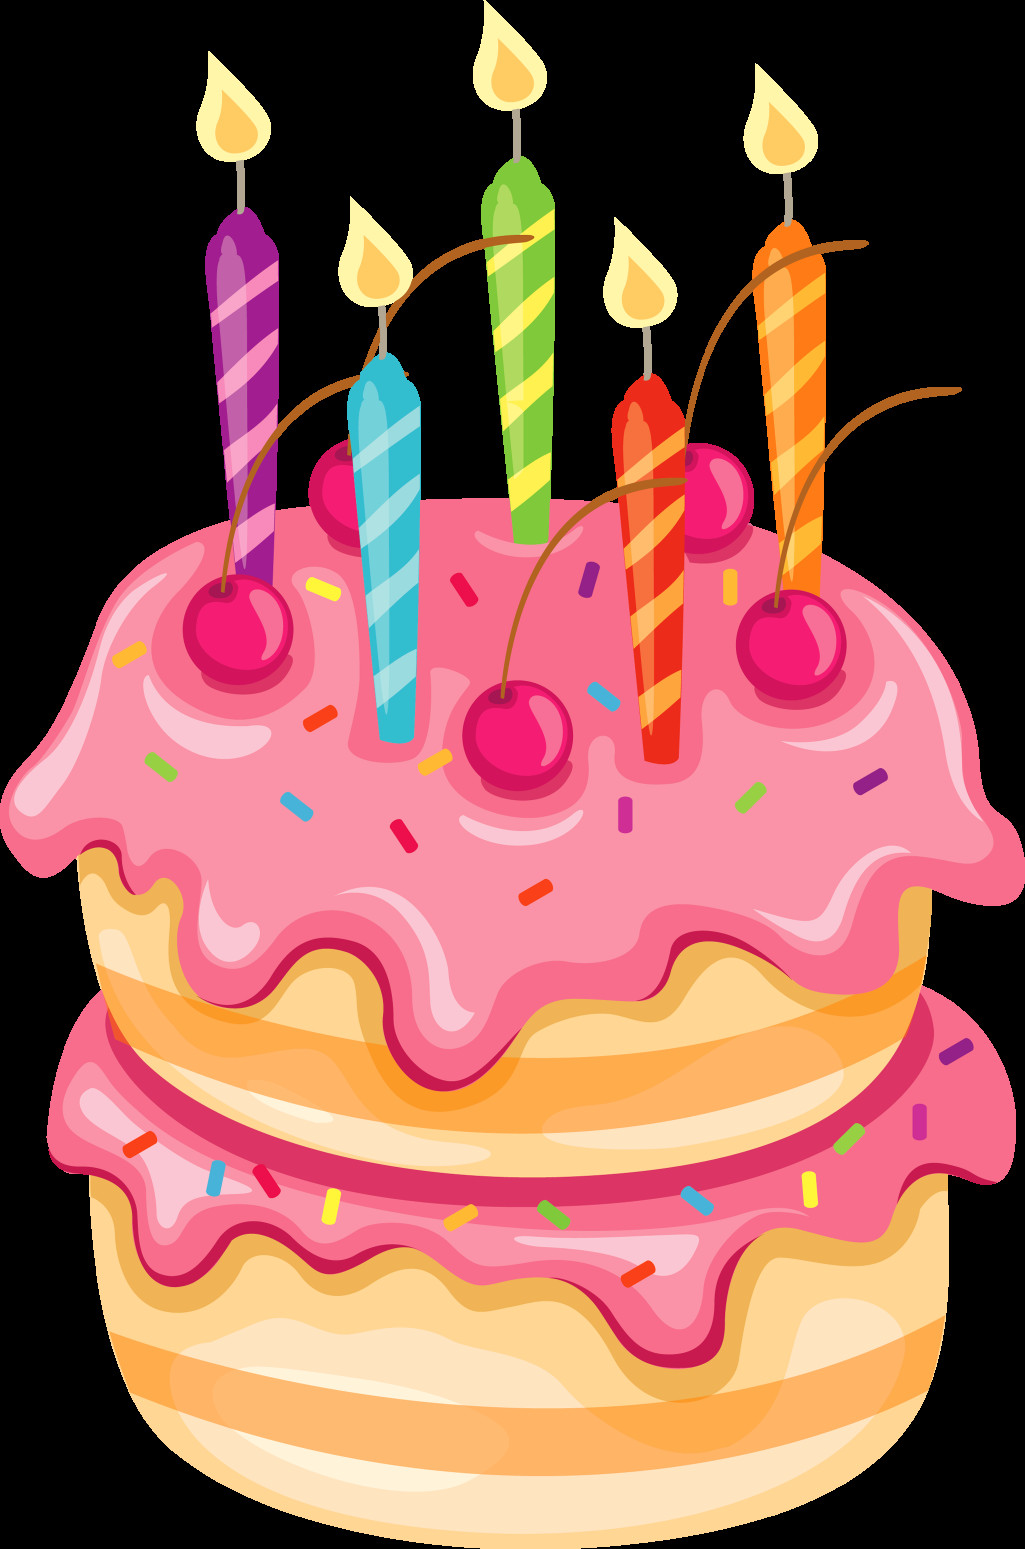 Clipart Birthday Cake
 Pink Cake with Candles PNG Clipart